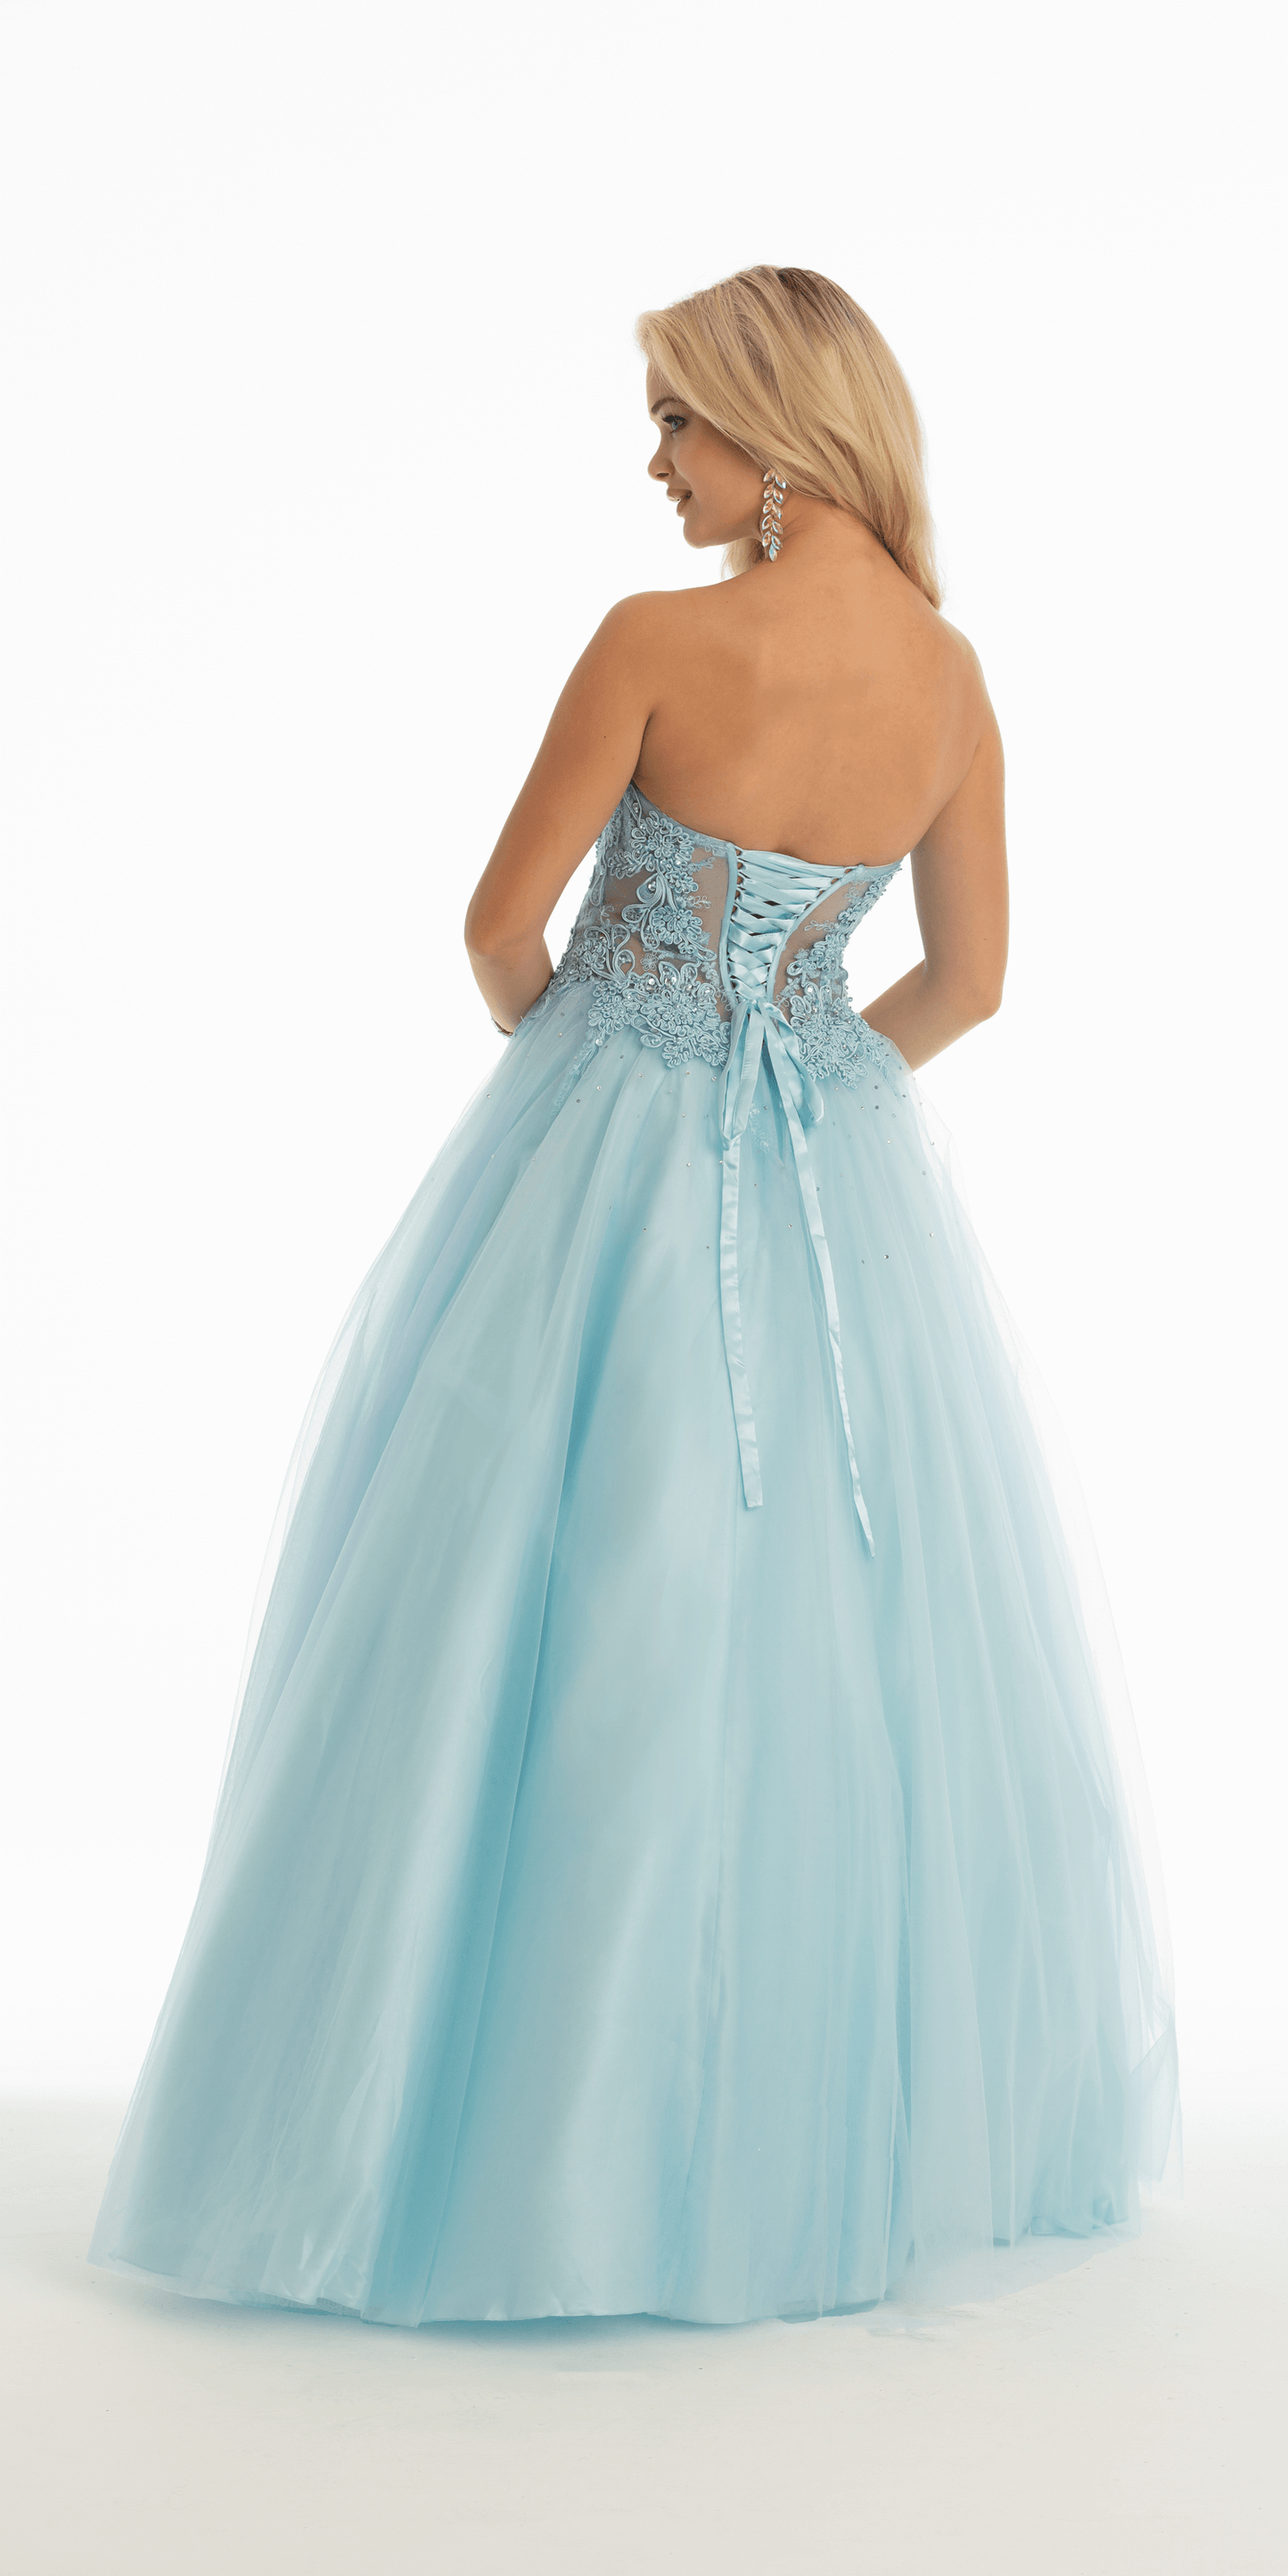 Camille La Vie Sweetheart Embroidered Corset Ballgown with Heat Set Stones